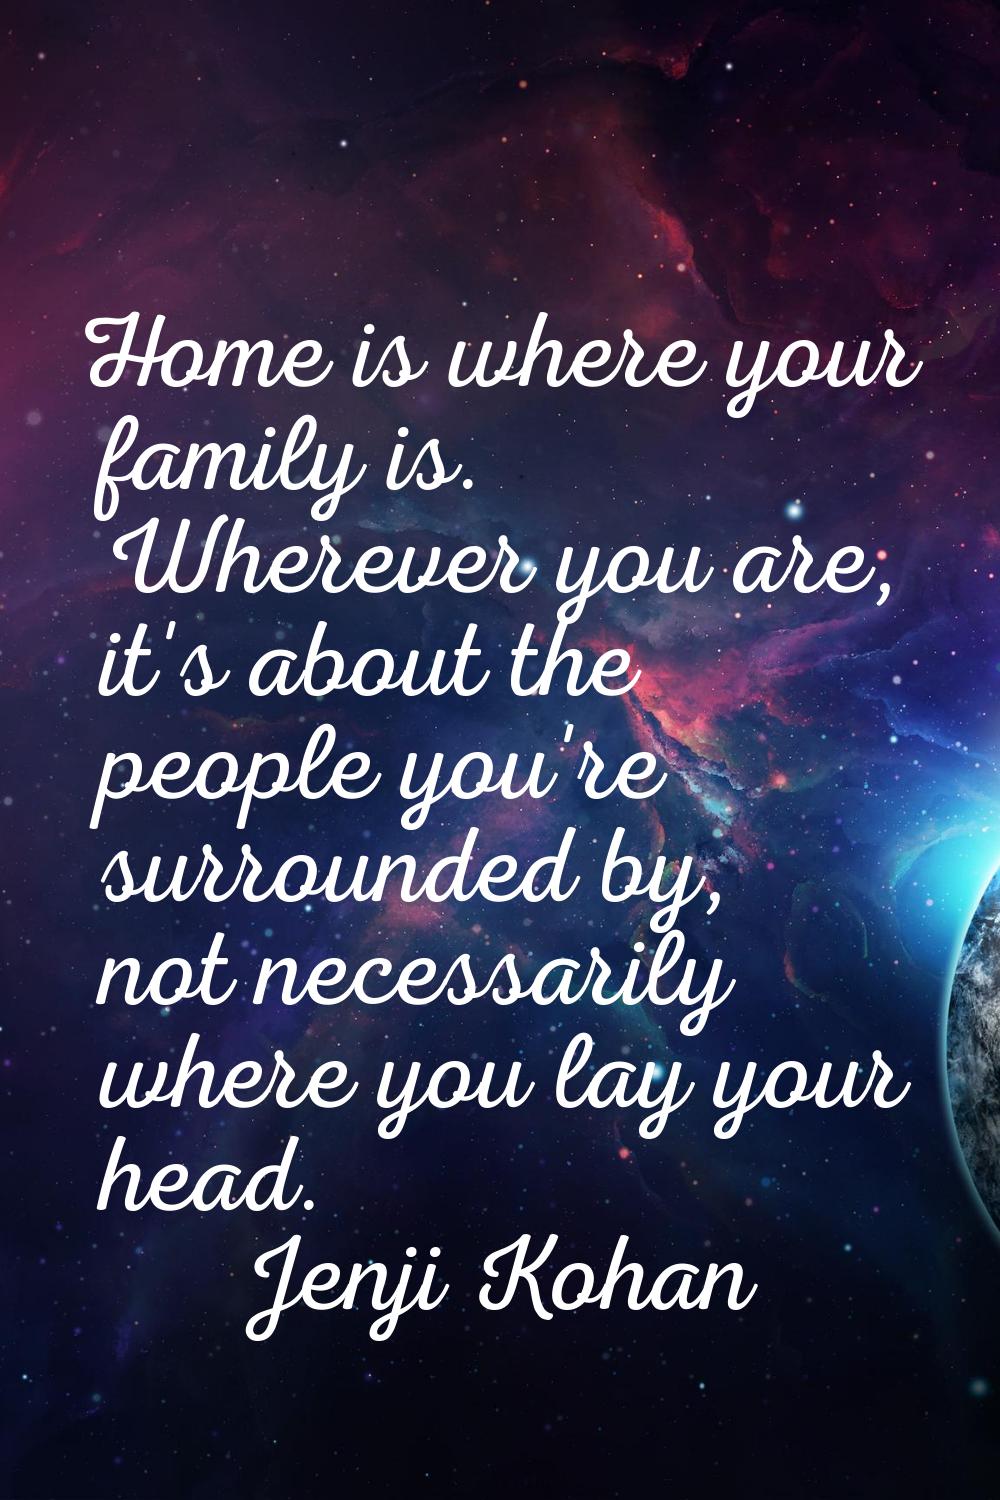 Home is where your family is. Wherever you are, it's about the people you're surrounded by, not nec